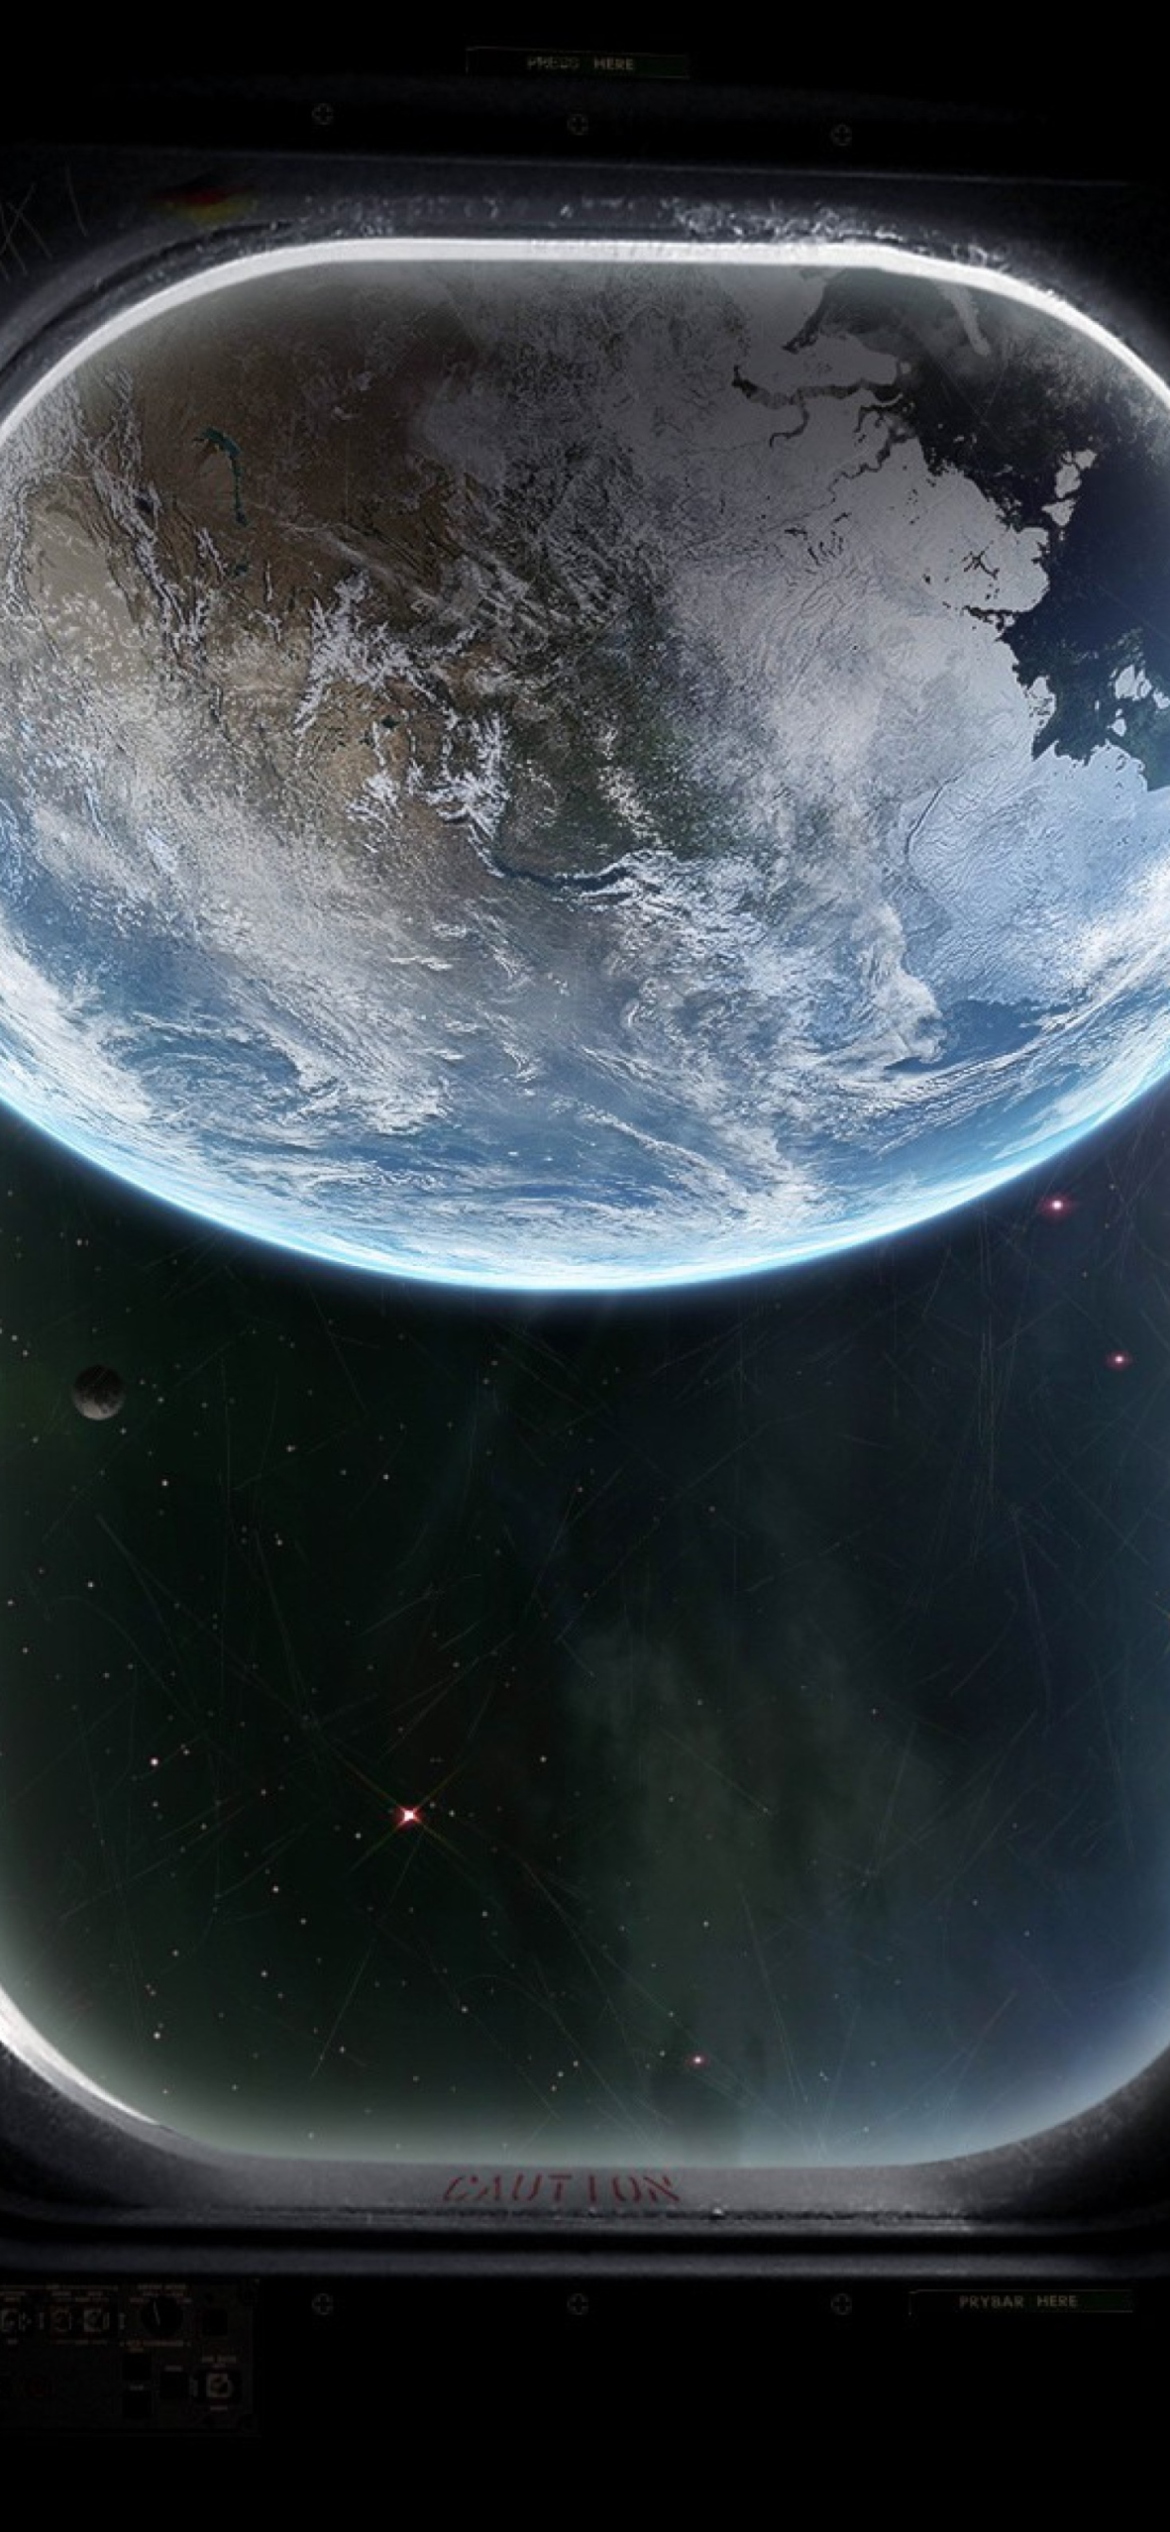 View From Outer Space screenshot #1 1170x2532